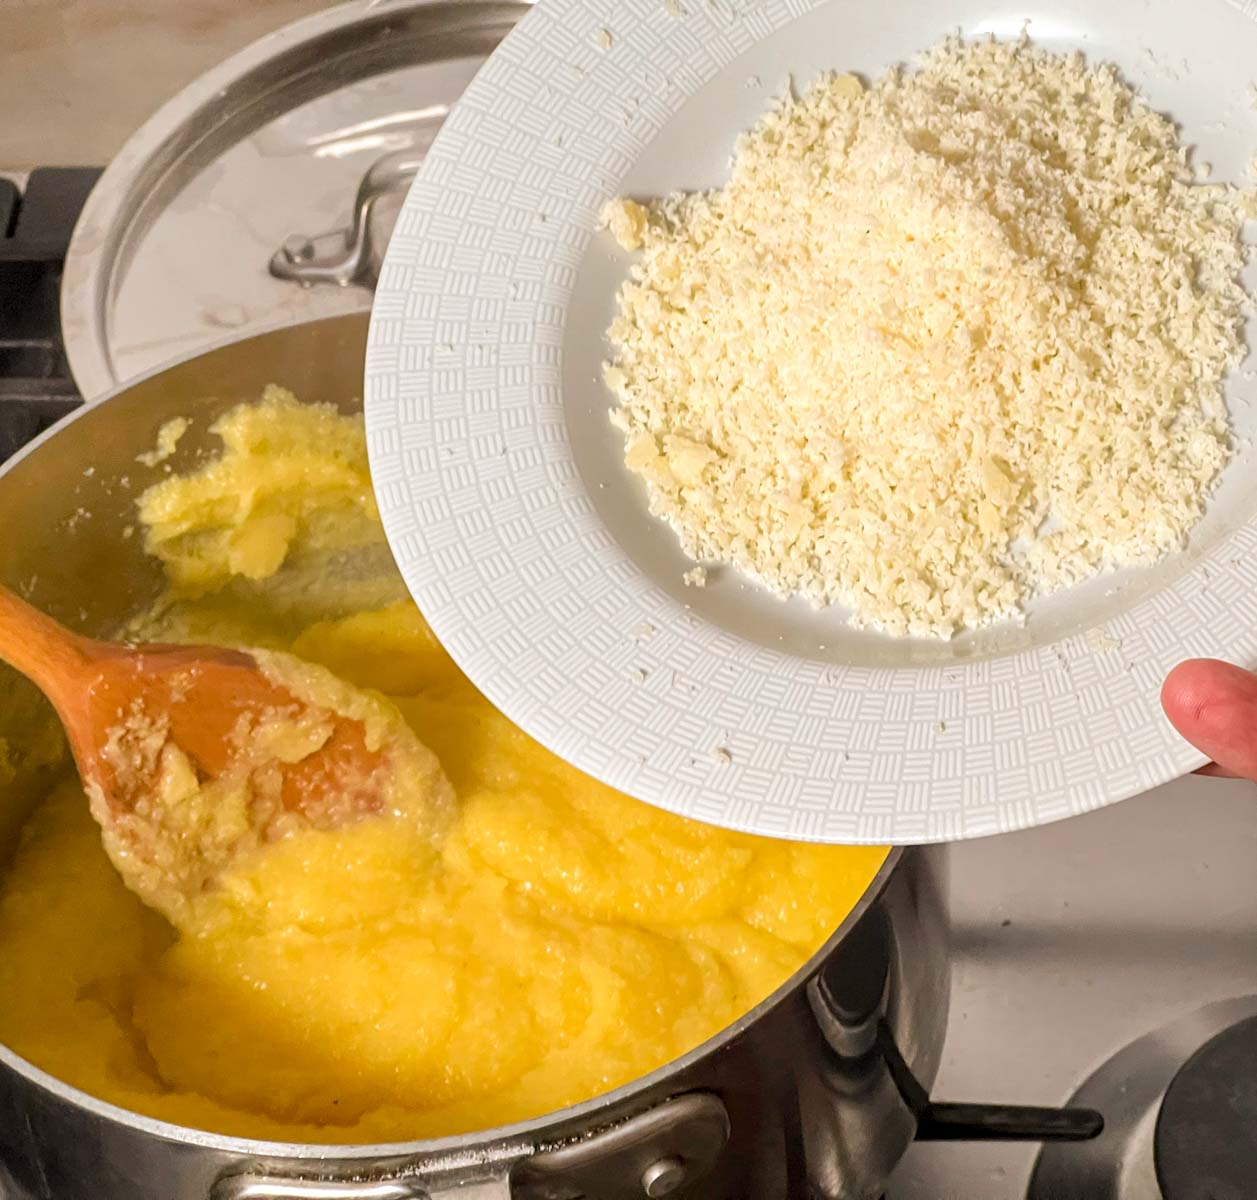 Grated grana-padano being added to finished polenta